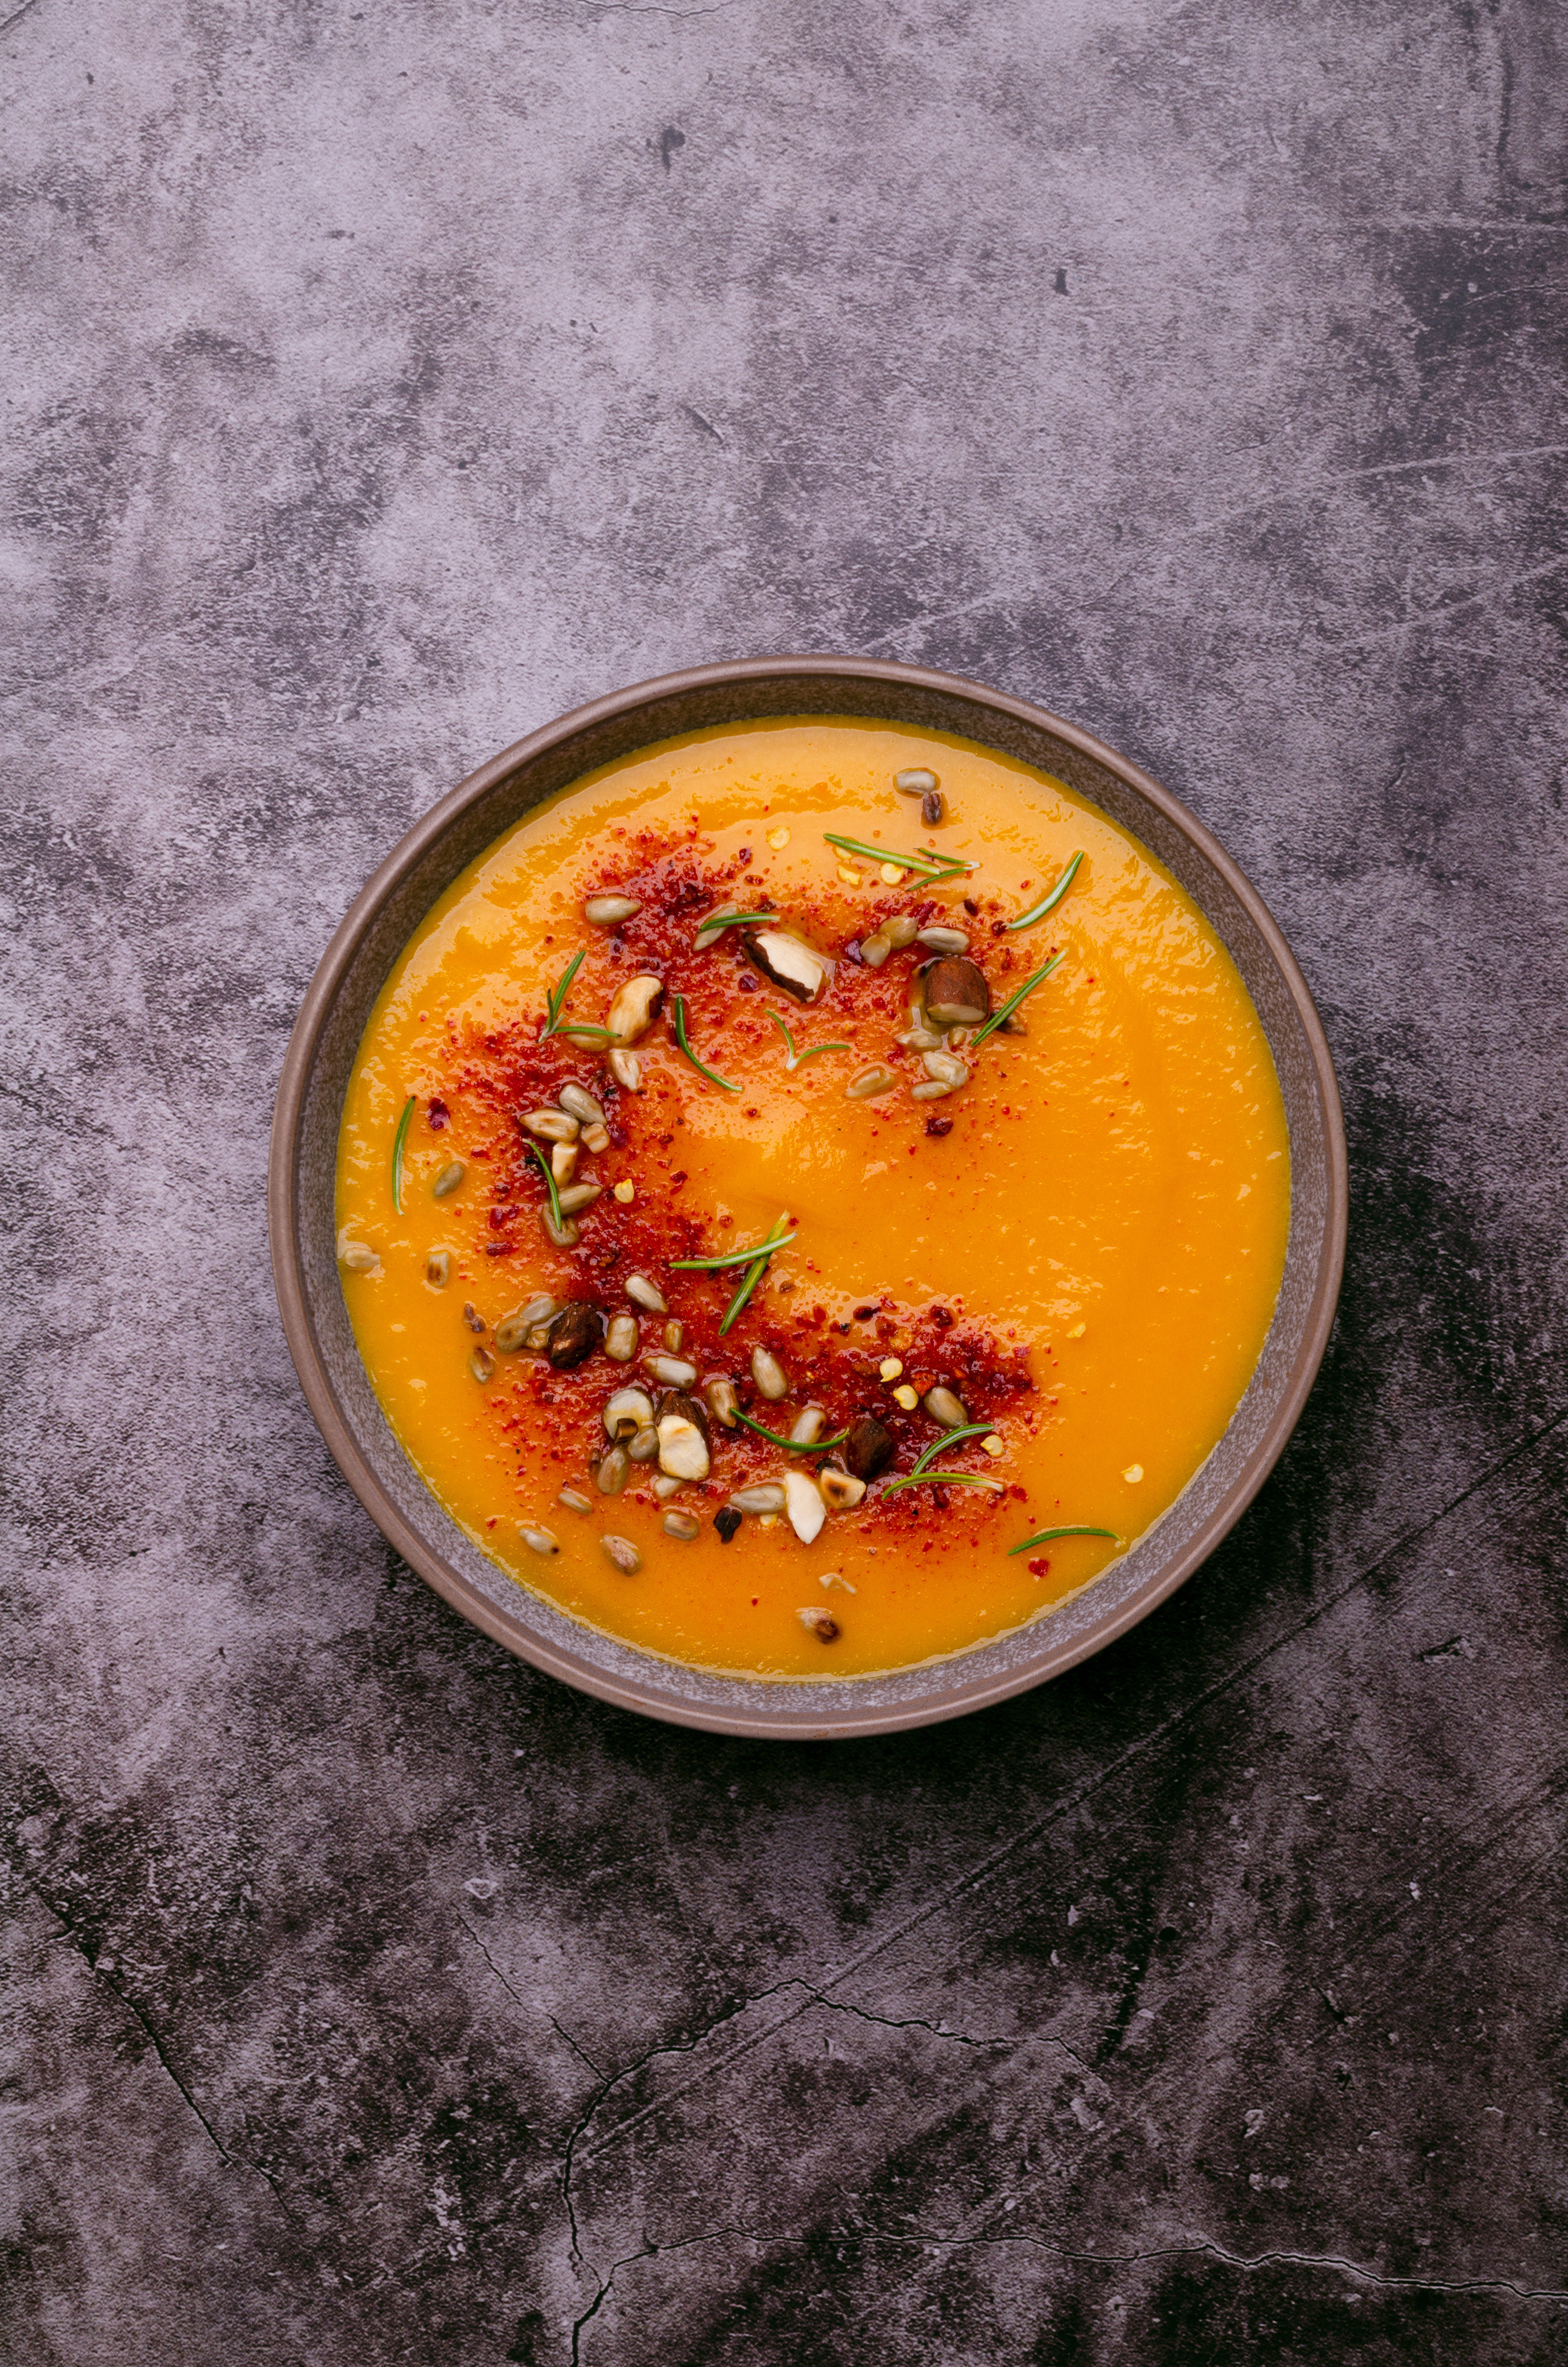 Butternut squash soup with red pepper